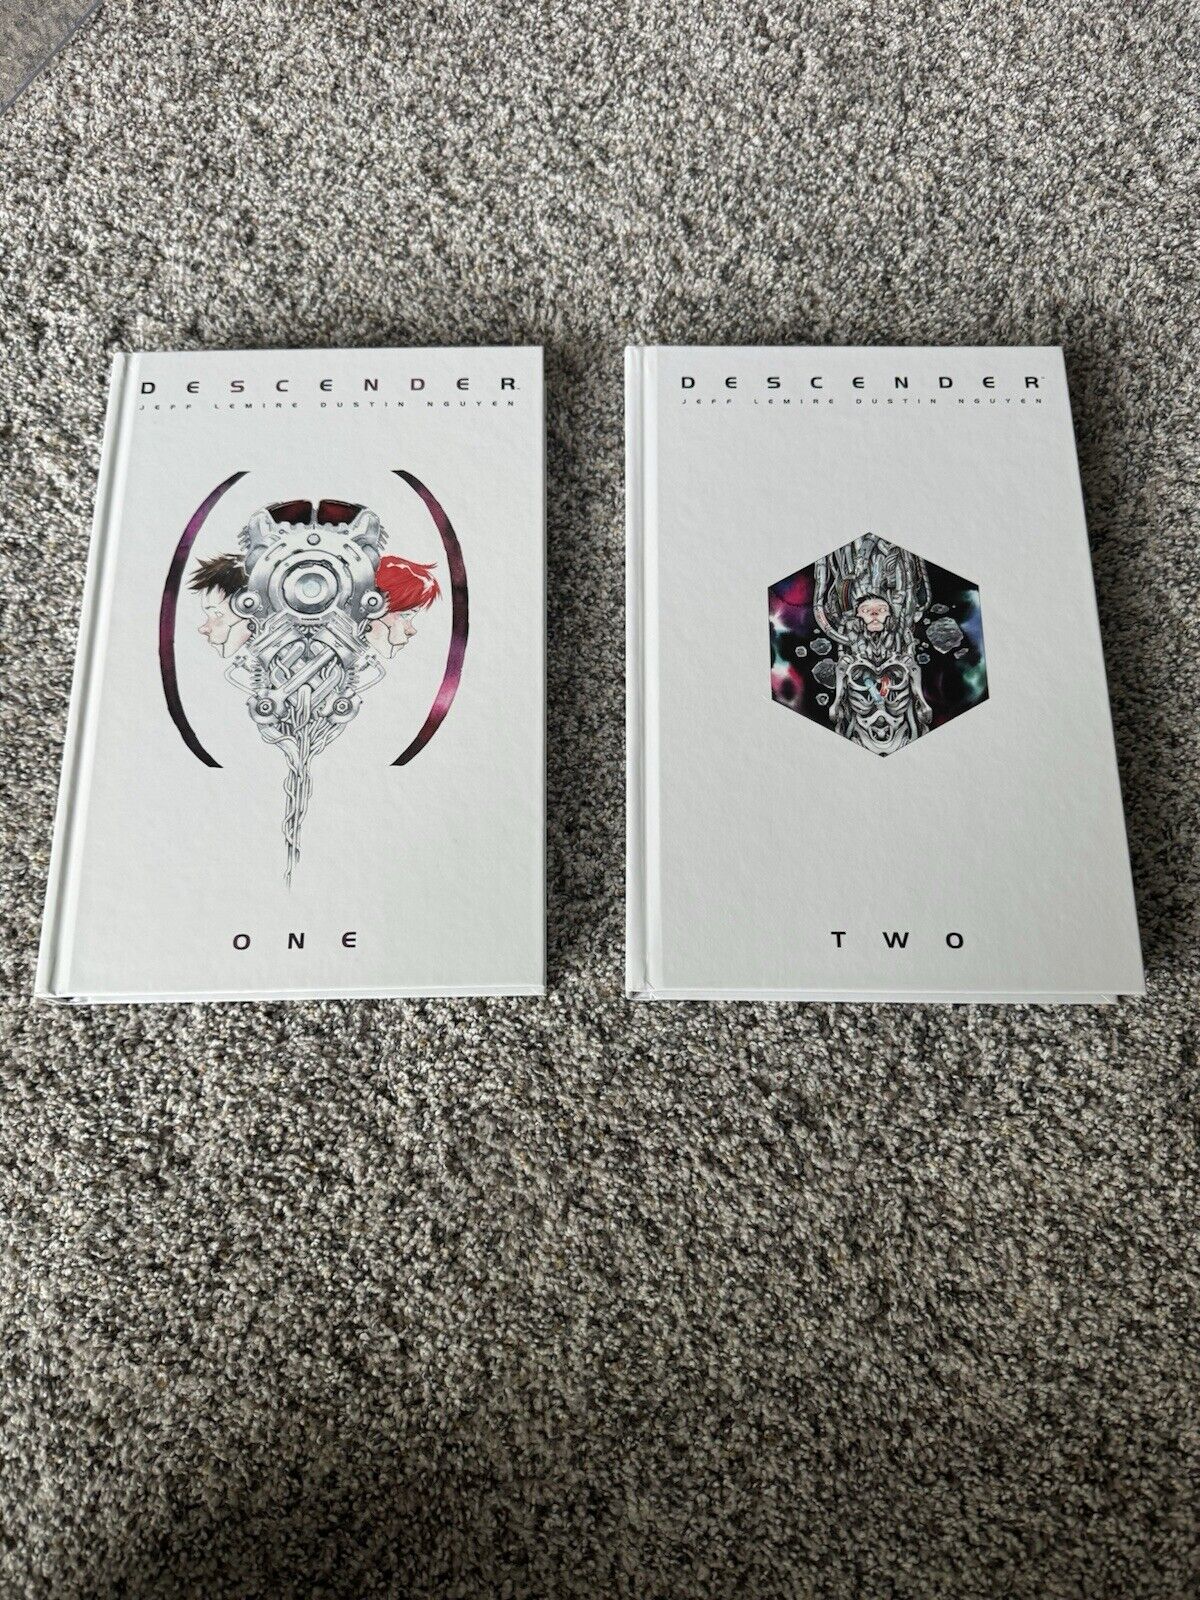 Descender Deluxe Edition Hardcover Volume 1 and 2.  DCBS. Lemire. Image Comics.